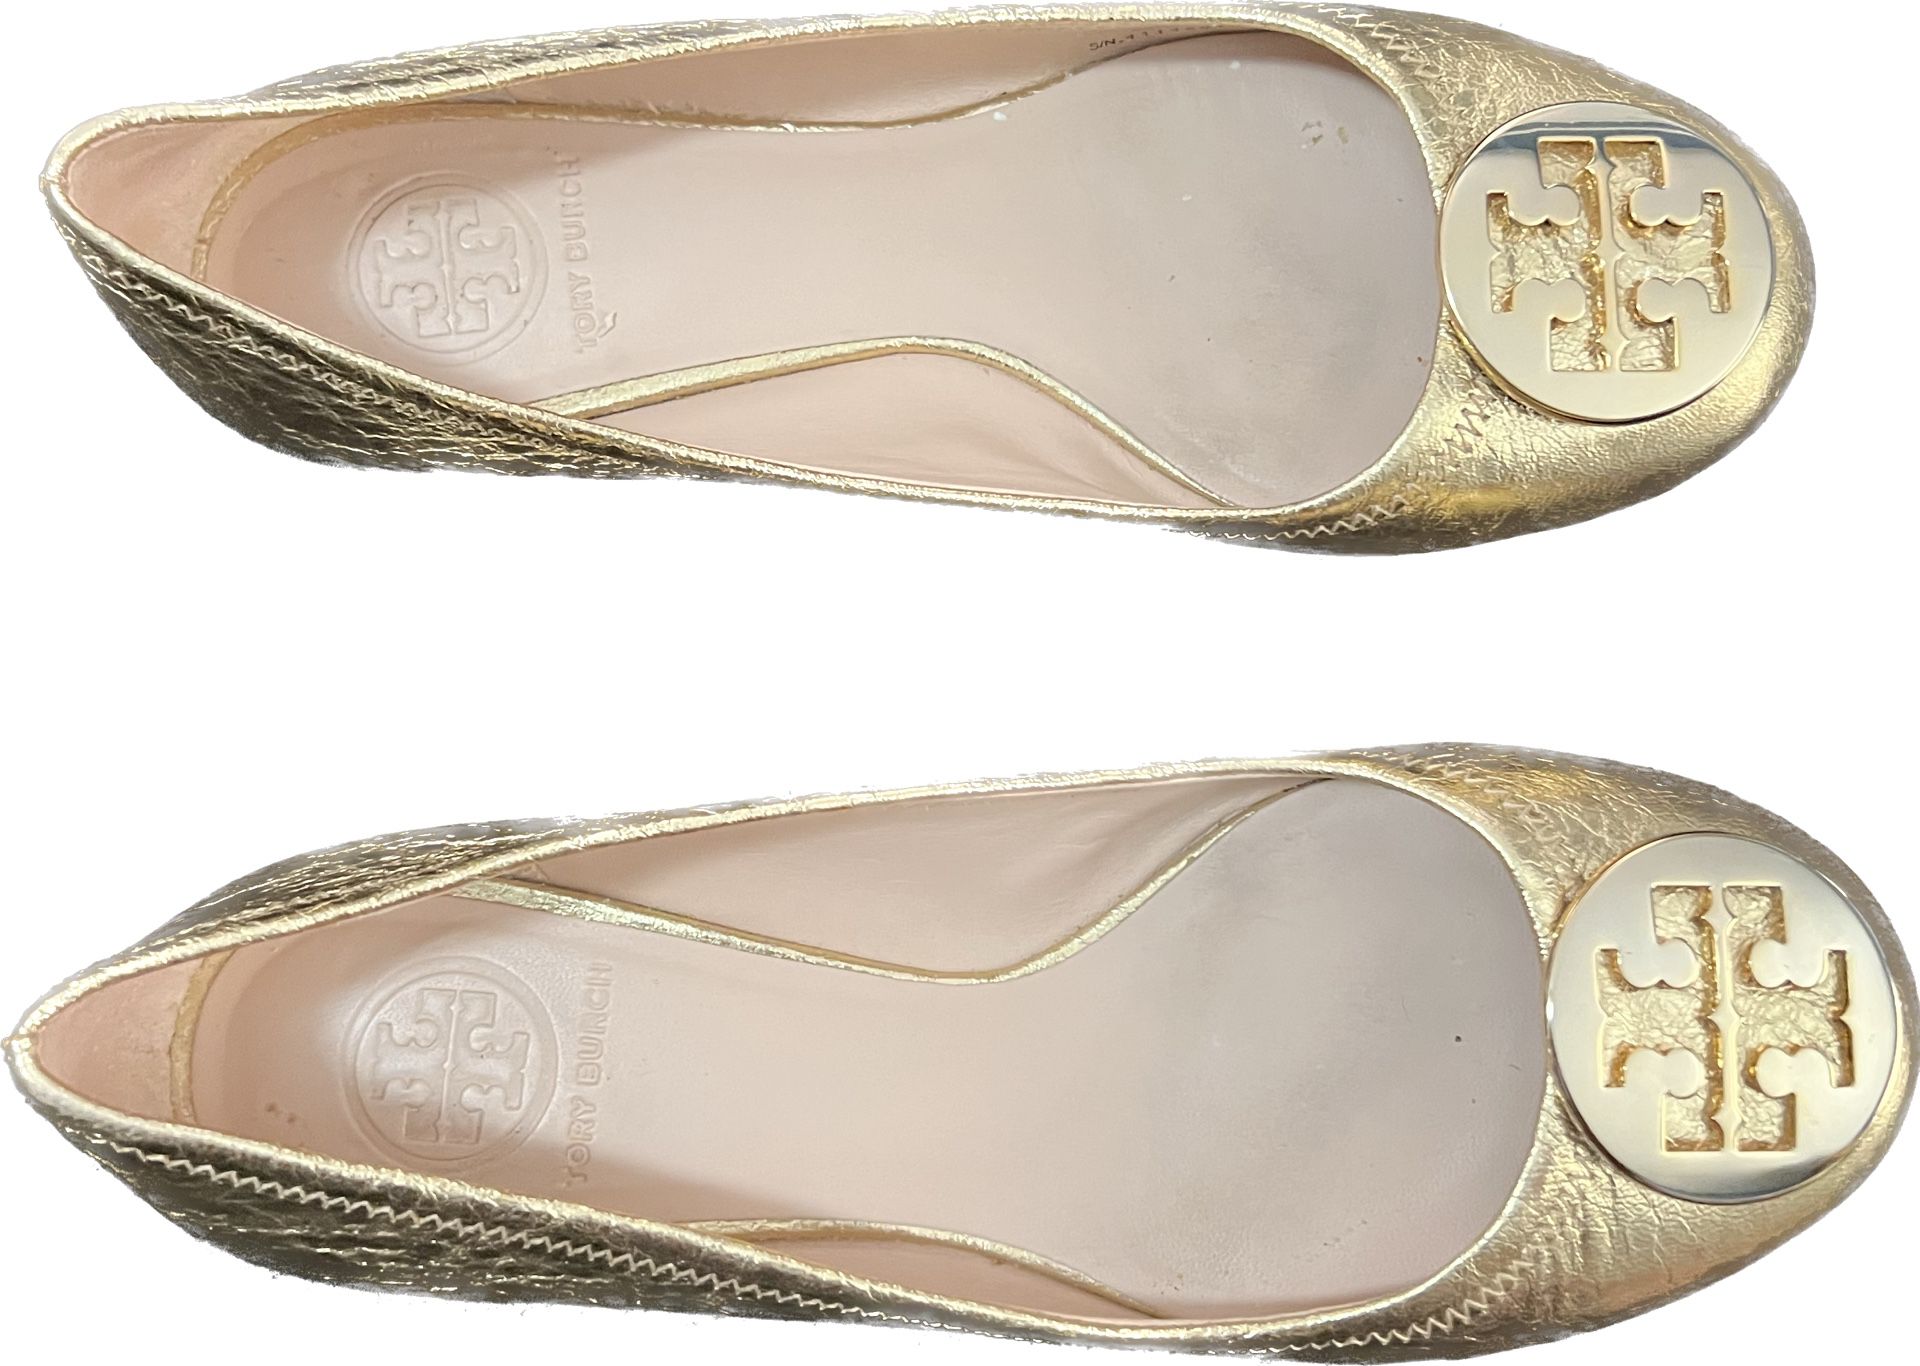 Tory Burch Claire Ballet Flats for Sale in Huntington Beach, CA - OfferUp